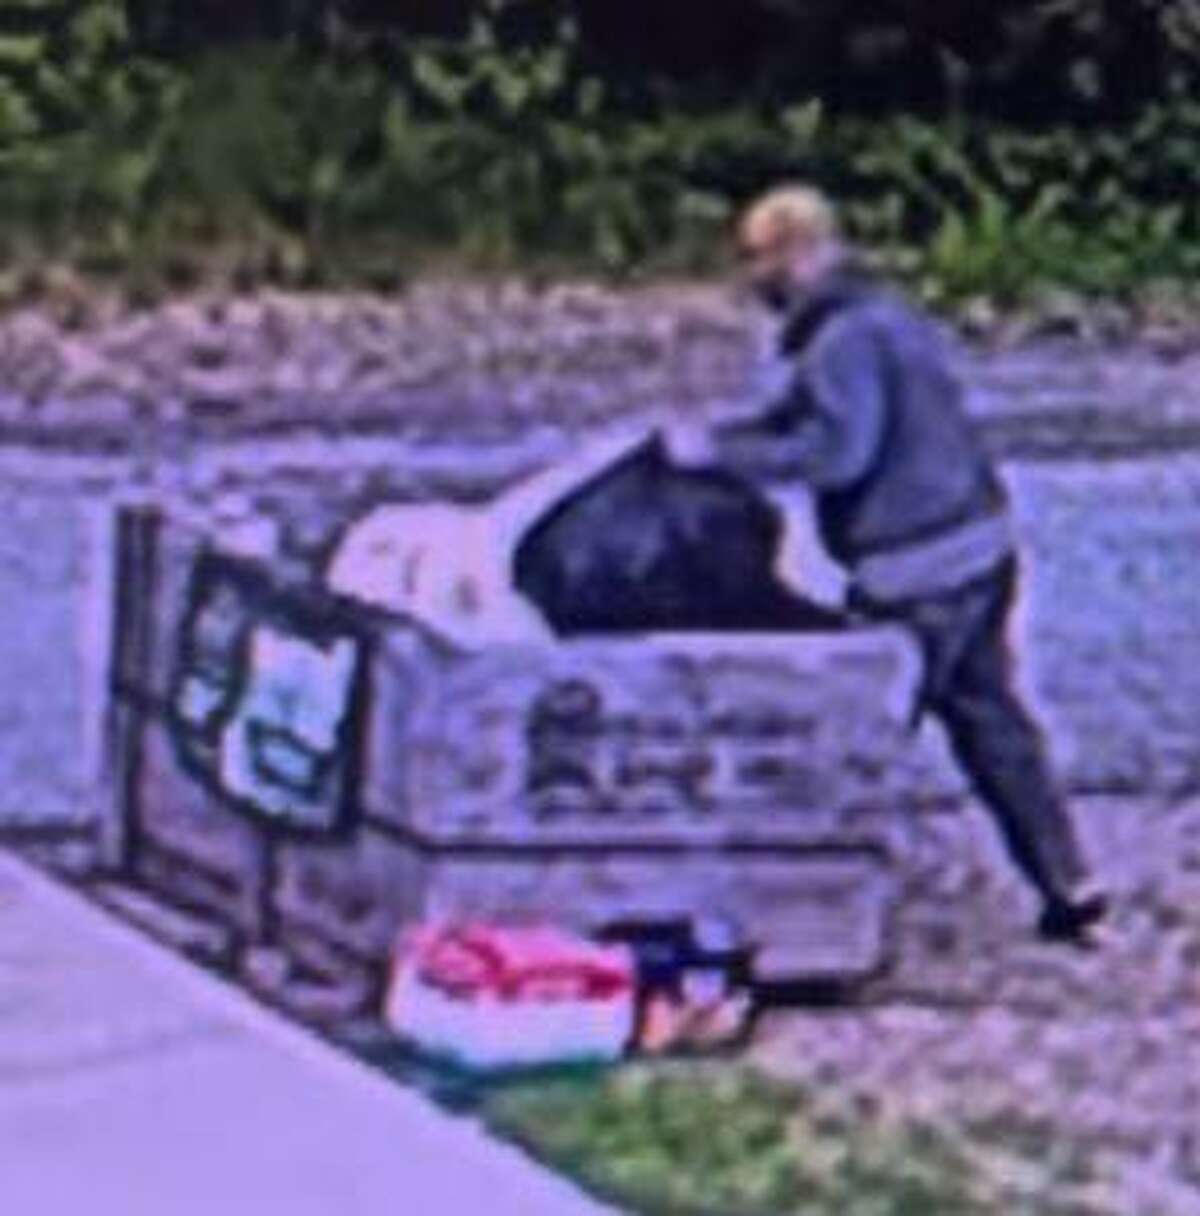 State police are searching for a man and woman accused of stealing donations from a nonprofit. Anyone with information about the suspects’ identities is asked to contact Troop D at 860-779-4900 or email Daryl.Manbeck@CT.gov.